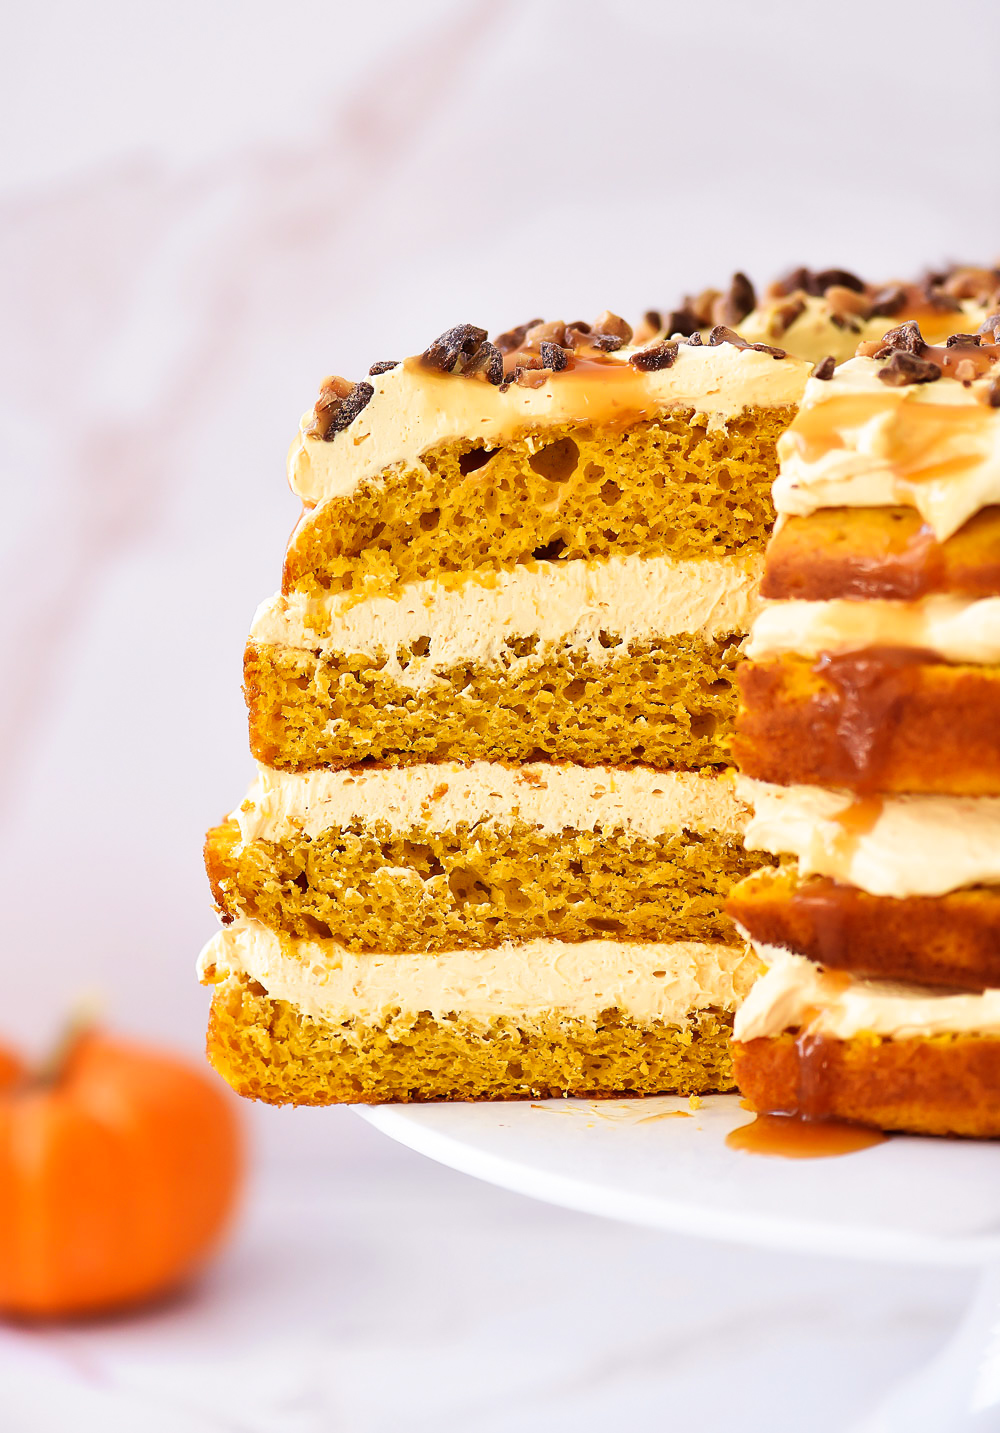 Pumpkin Torte has pumpkin cake layers with pumpkin whipped cream and is topped with loads of caramel sauce and toffee. Life-in-the-Lofthouse.com